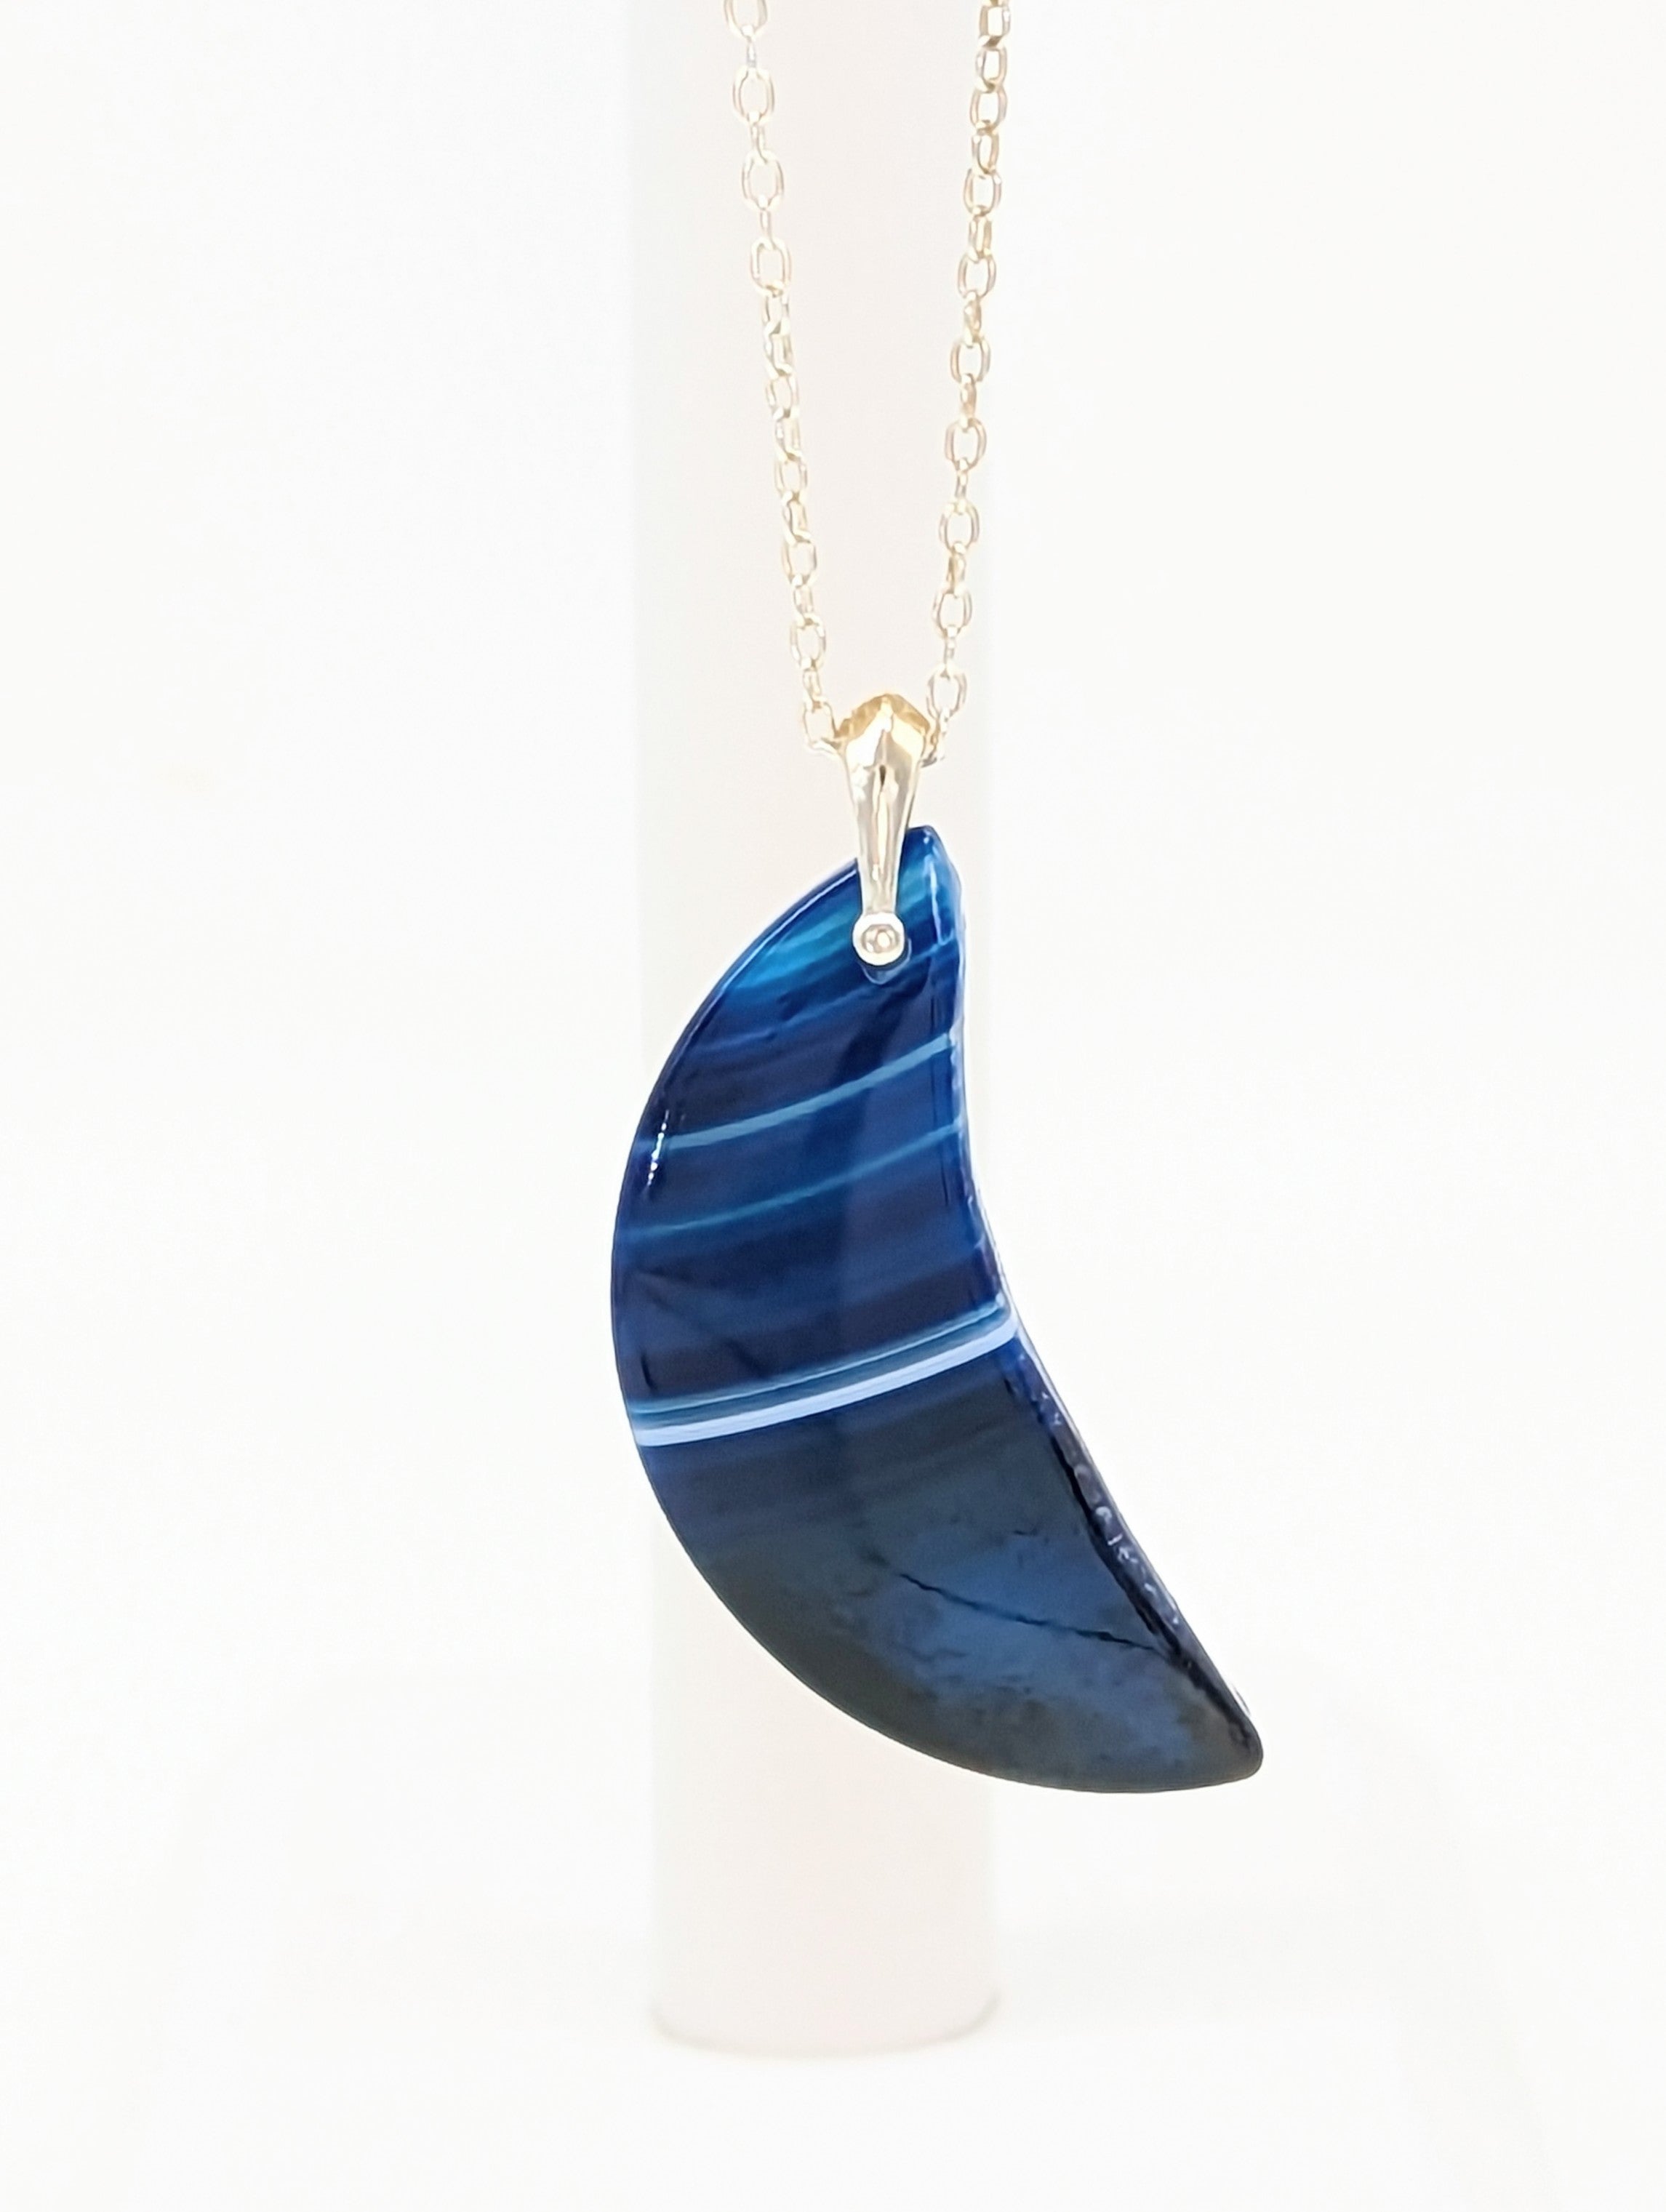 Blue Agate Moon Necklace on Sterling Silver Bail and Chain